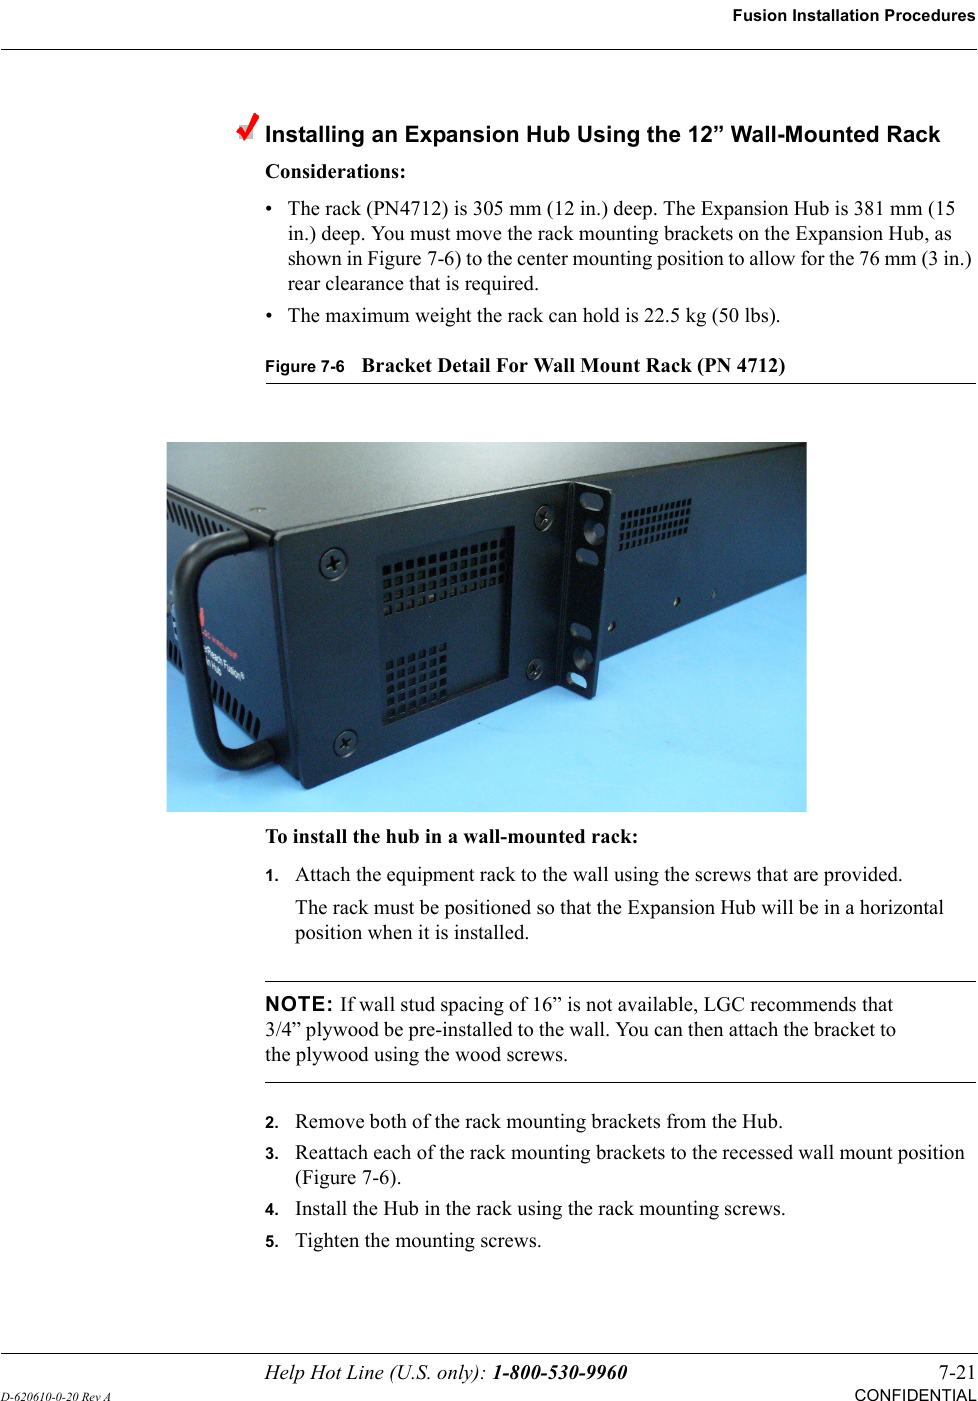 Help Hot Line (U.S. only): 1-800-530-9960 7-21D-620610-0-20 Rev ACONFIDENTIALFusion Installation ProceduresInstalling an Expansion Hub Using the 12” Wall-Mounted RackConsiderations:• The rack (PN4712) is 305 mm (12 in.) deep. The Expansion Hub is 381 mm (15 in.) deep. You must move the rack mounting brackets on the Expansion Hub, as shown in Figure 7-6) to the center mounting position to allow for the 76 mm (3 in.) rear clearance that is required.• The maximum weight the rack can hold is 22.5 kg (50 lbs).Figure 7-6Bracket Detail For Wall Mount Rack (PN 4712)To install the hub in a wall-mounted rack:1.Attach the equipment rack to the wall using the screws that are provided.The rack must be positioned so that the Expansion Hub will be in a horizontal position when it is installed.NOTE: If wall stud spacing of 16” is not available, LGC recommends that 3/4” plywood be pre-installed to the wall. You can then attach the bracket to the plywood using the wood screws.2.Remove both of the rack mounting brackets from the Hub.3.Reattach each of the rack mounting brackets to the recessed wall mount position (Figure 7-6).4.Install the Hub in the rack using the rack mounting screws.5.Tighten the mounting screws.